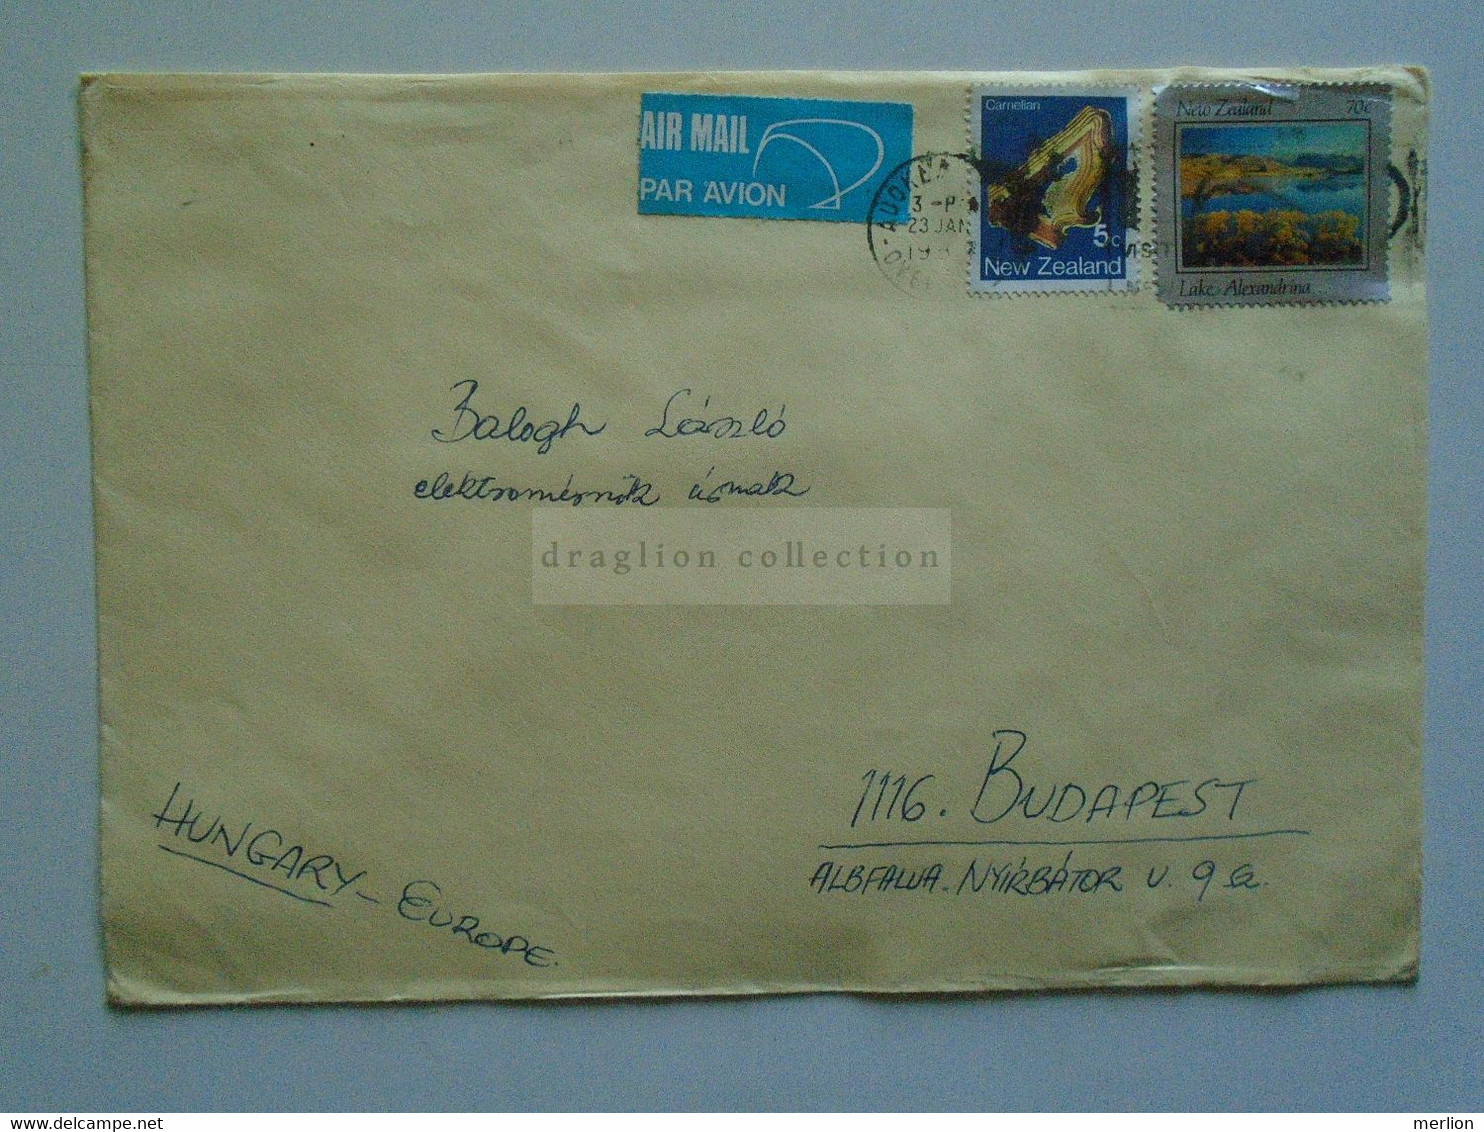 E0247 New Zealand  Airmail  Cover  - Cancel   Ca 1980  Titirangi  Auckland -stamp   Lake Alexandrina -   Sent To Hungary - Lettres & Documents